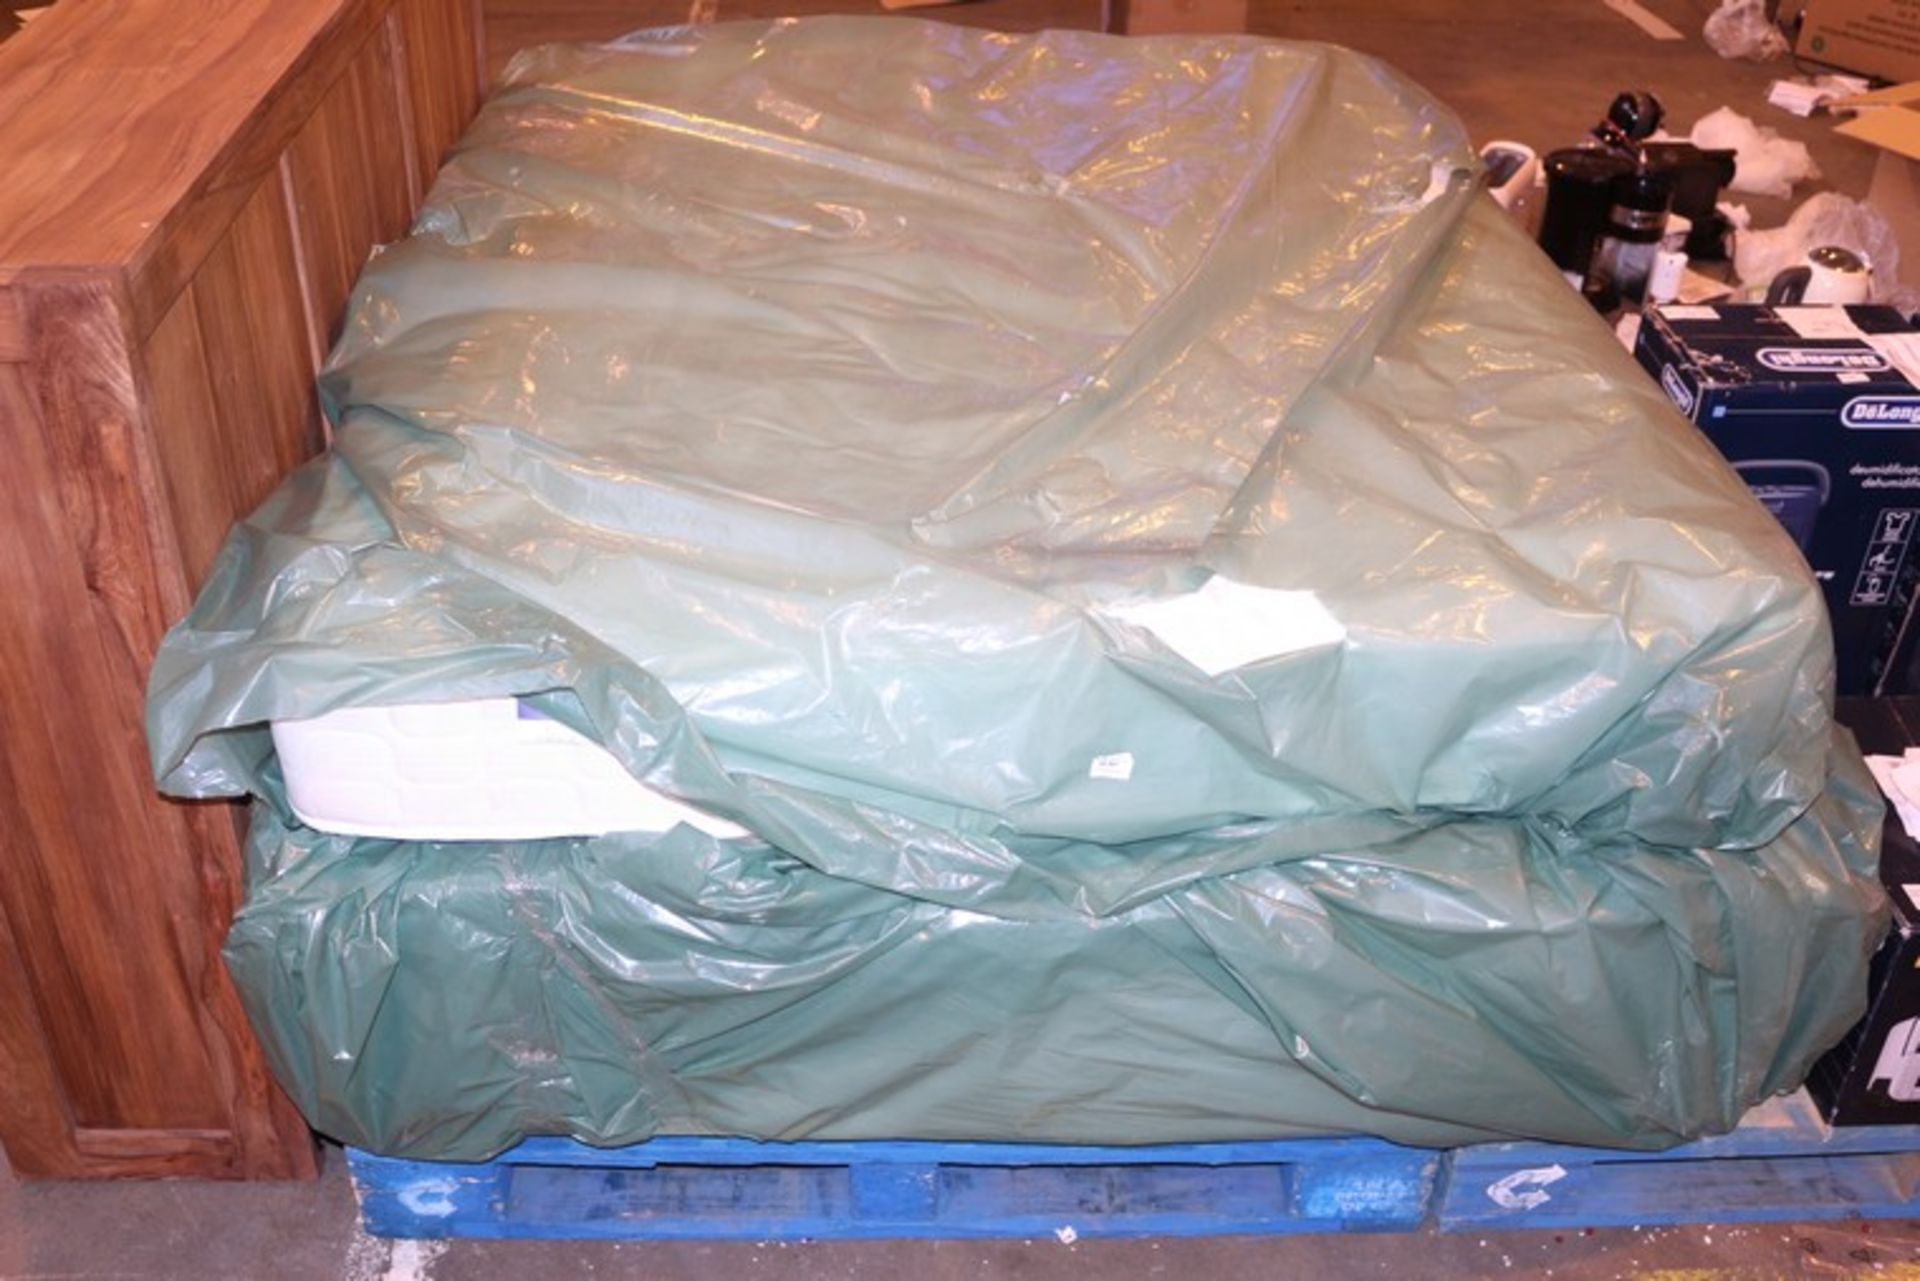 1 x 150CM KINGSIZE DIVAN BED BASE COMPLETE WITH A SILENT NIGHT MIRACOIL DOUBLE SIDED MATTRESS *